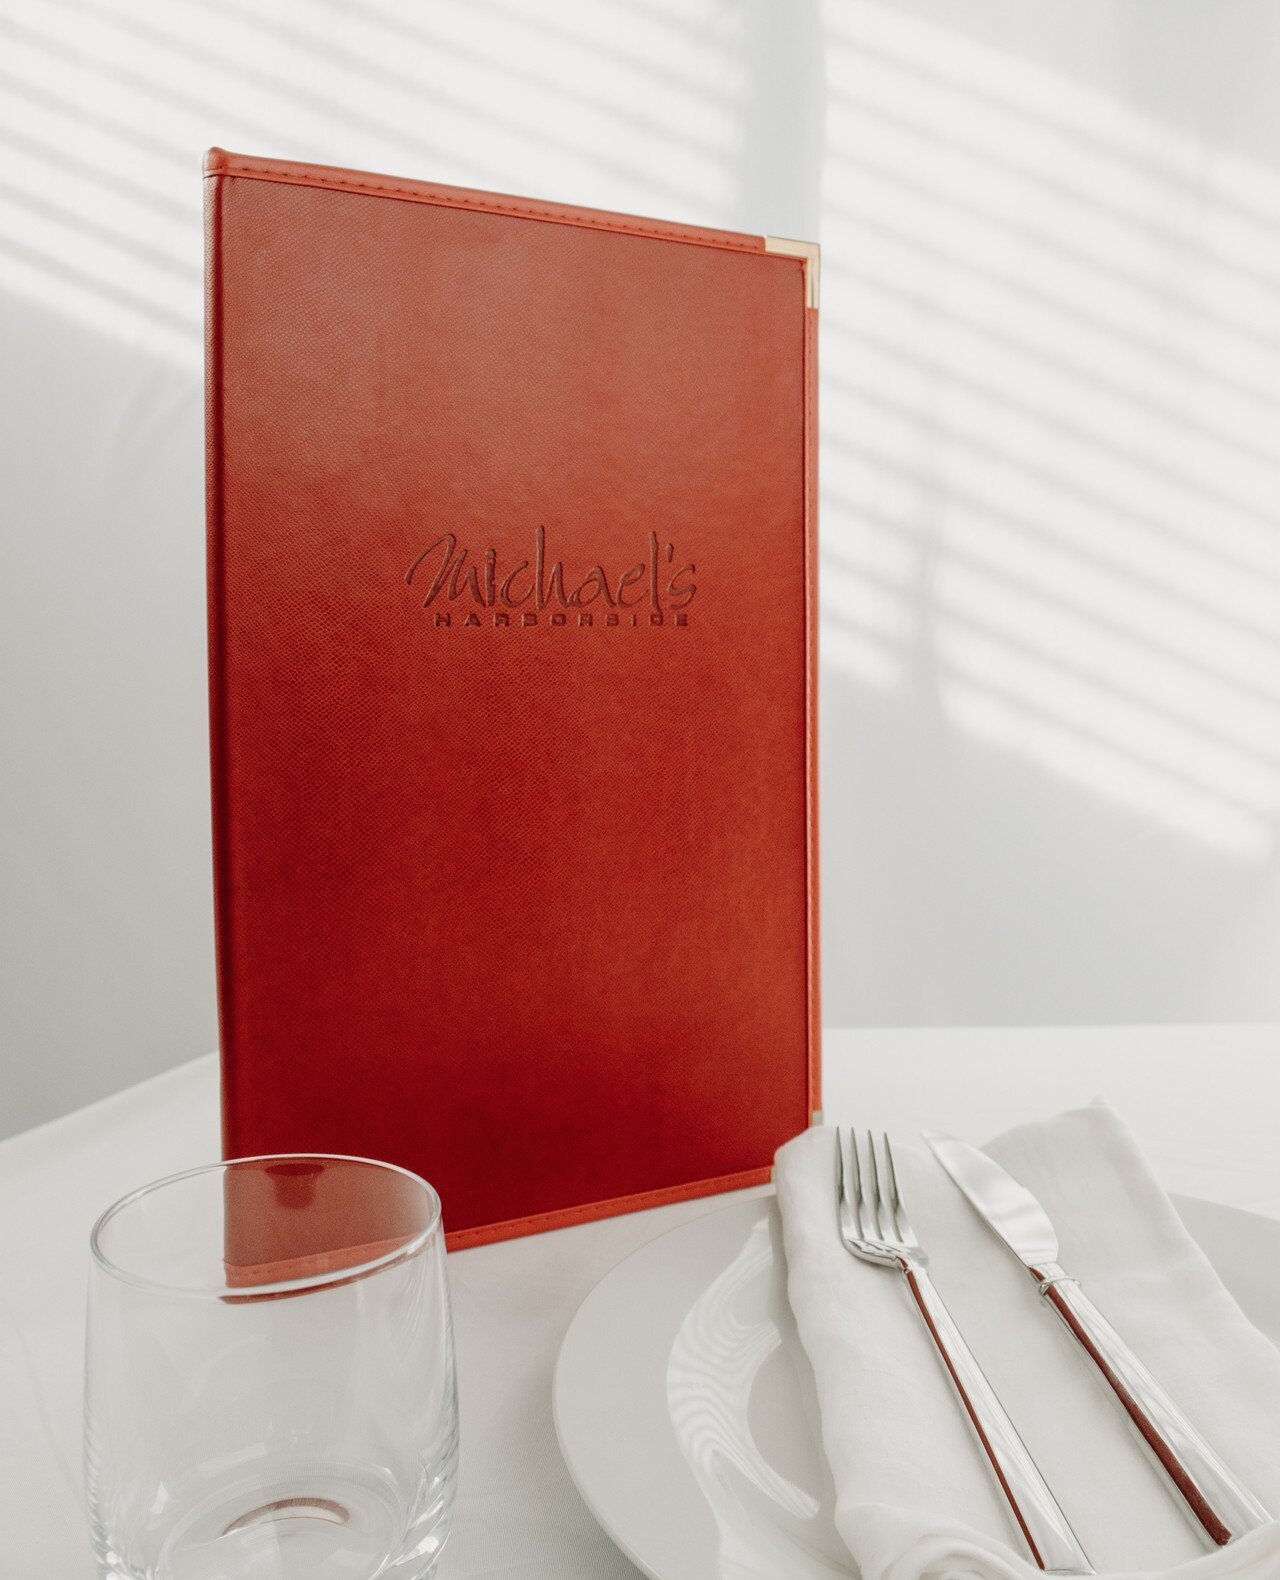 Transform the atmosphere of your restaurant by using Rio menu covers! These colorful, semi-gloss hardback covers feature a subtle reptilian pattern and will give you an avant-garde, modern look that is sure to invigorate your restaurant.⁠
-⁠
⁠
⁠
#cof